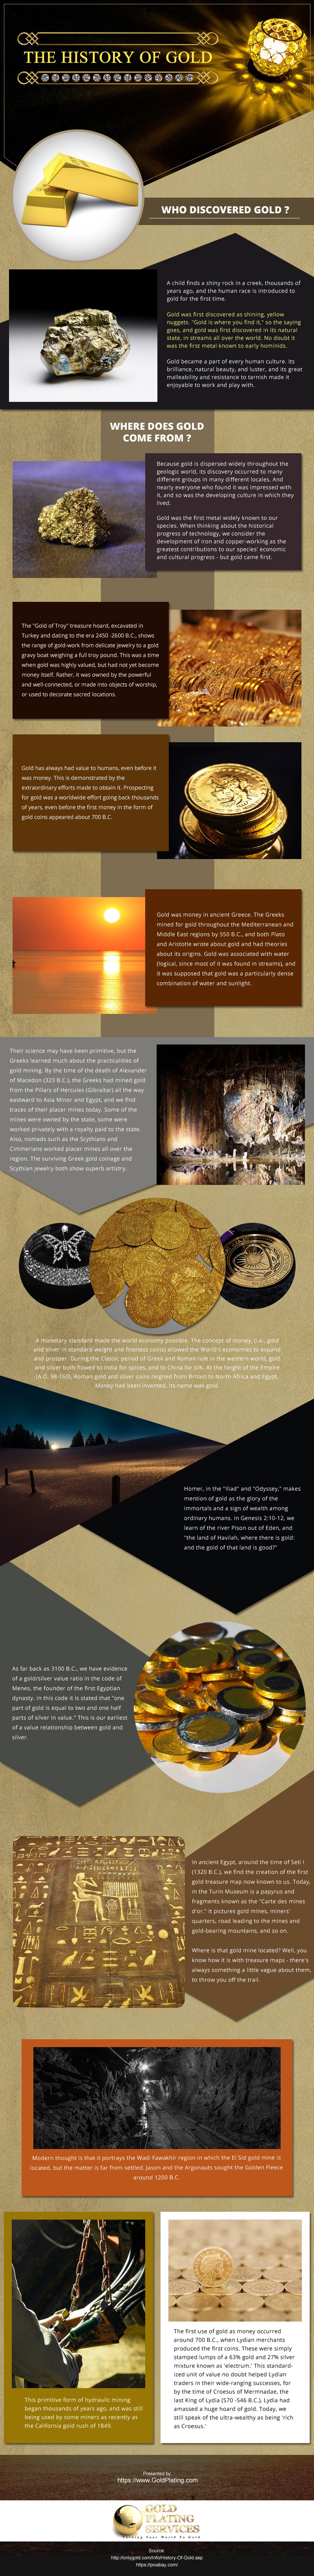 Gold-History Infographic